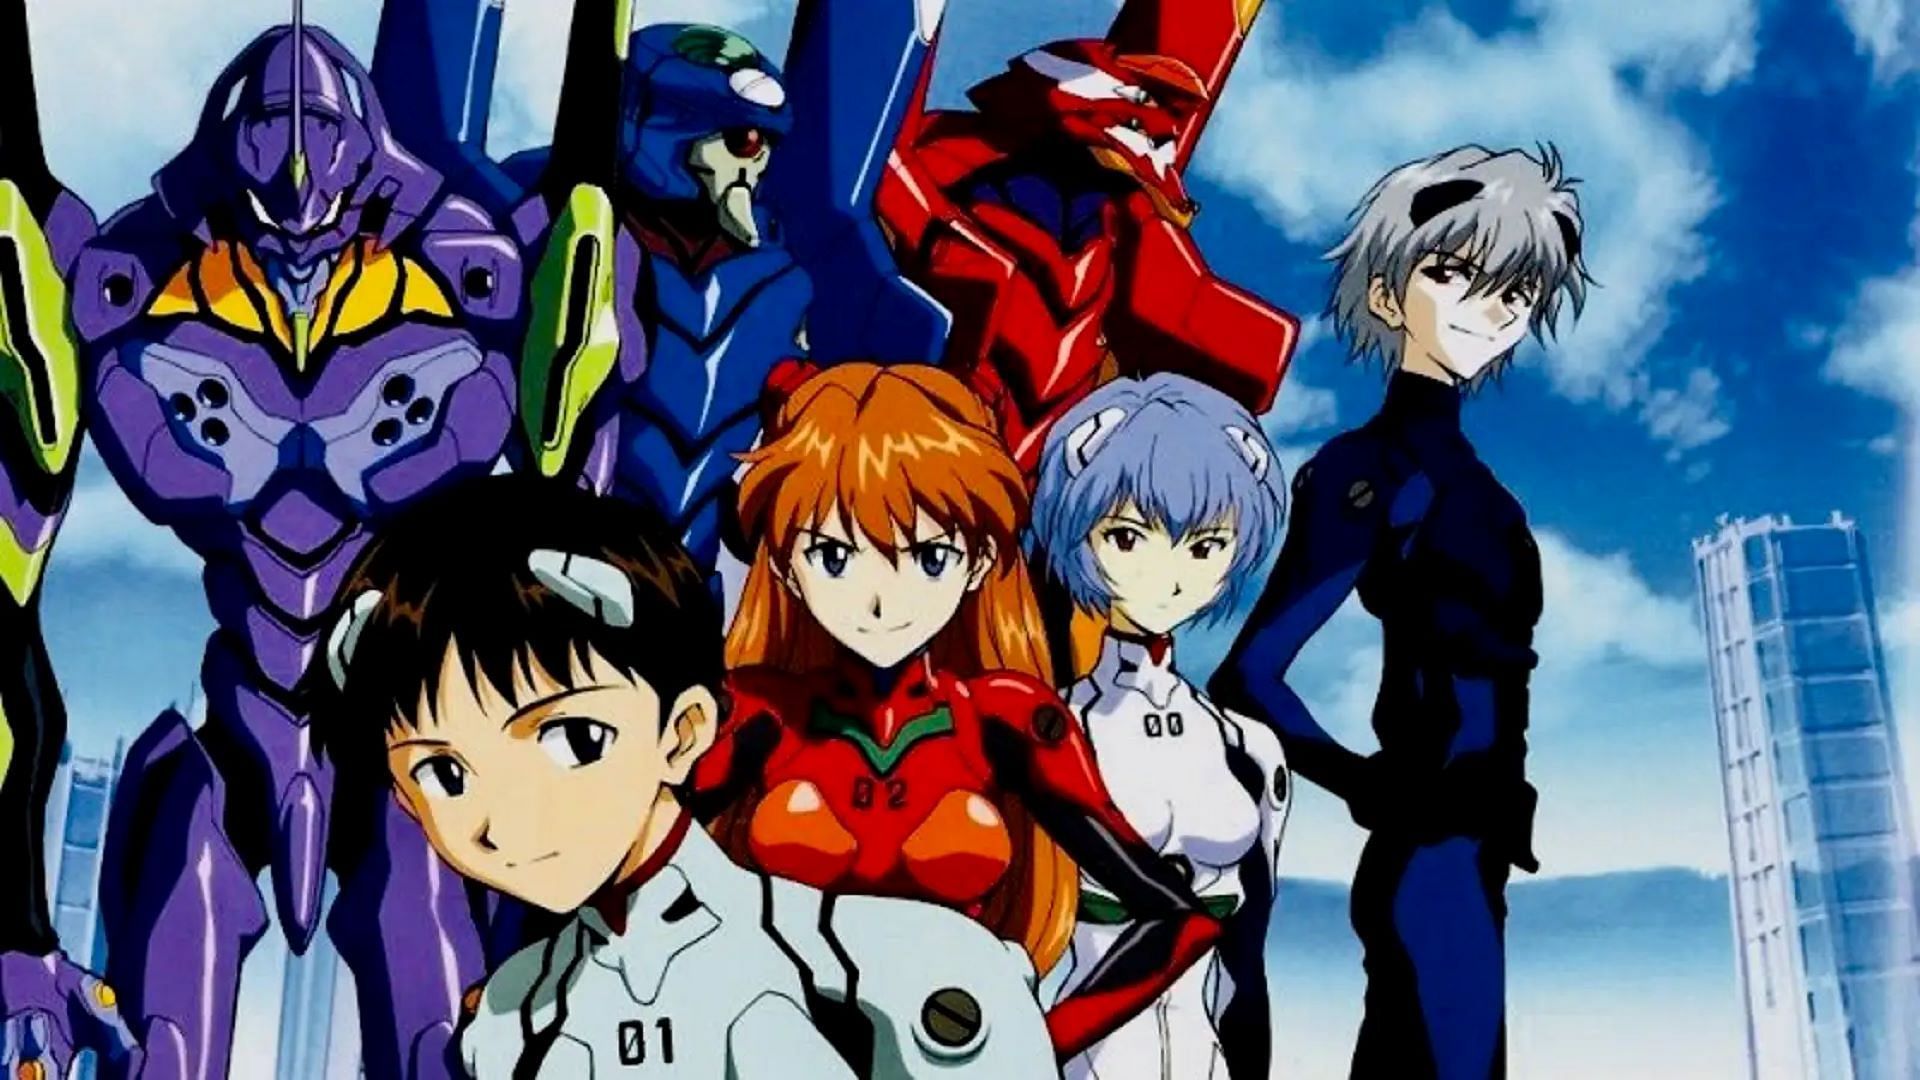 A still from the anime (Image via Gainax)